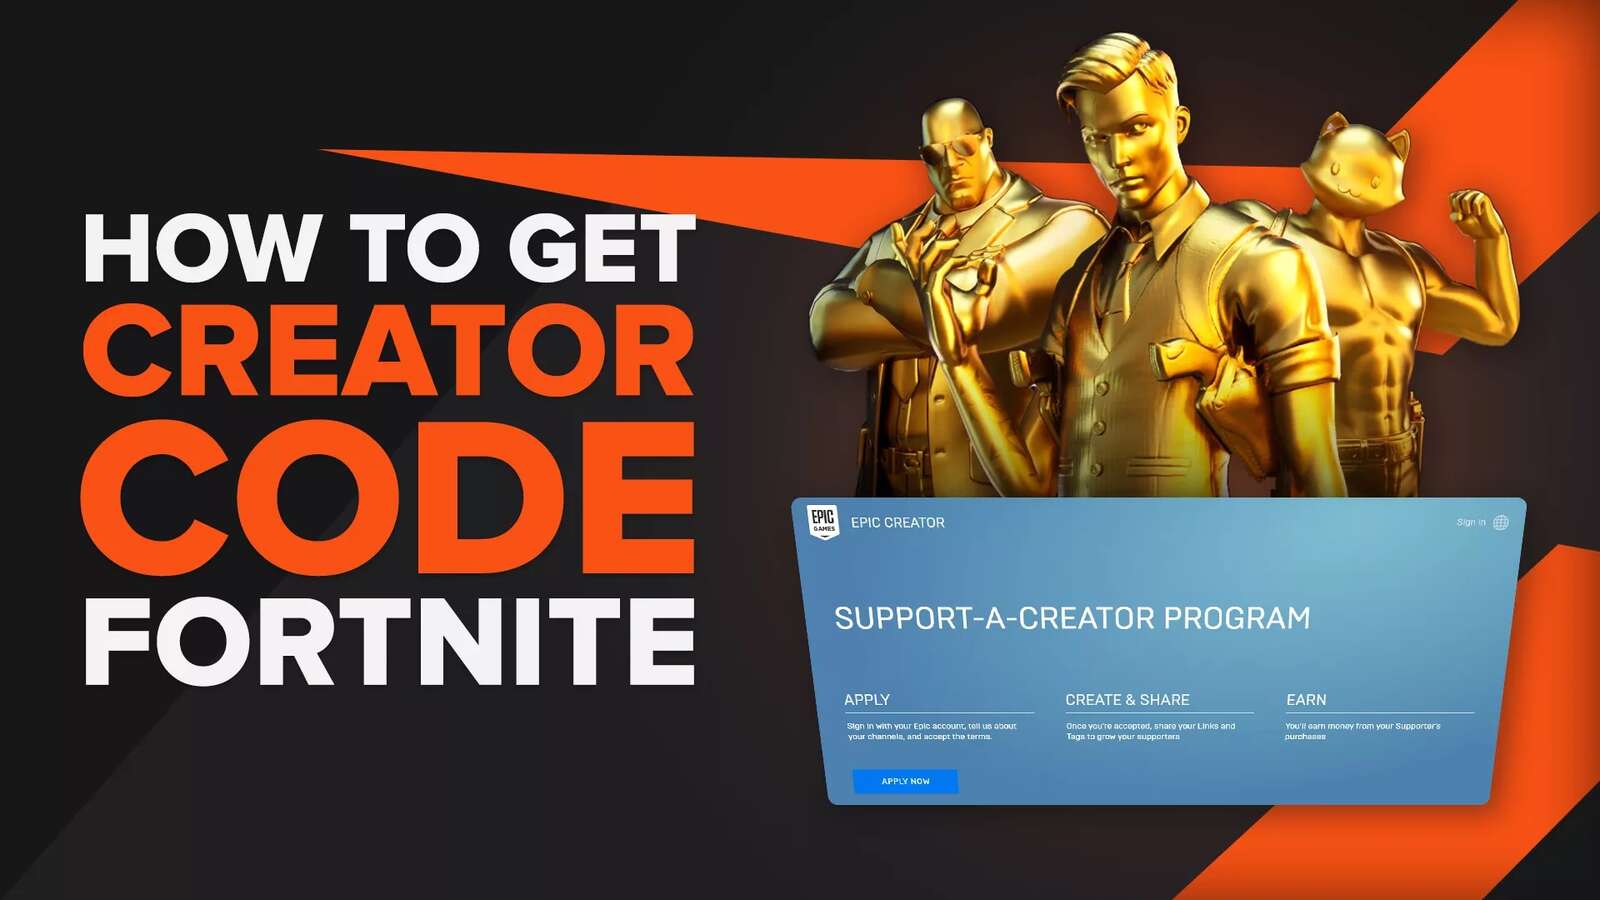 How to Get a Creator Code in Fortnite [Step-by-Step]